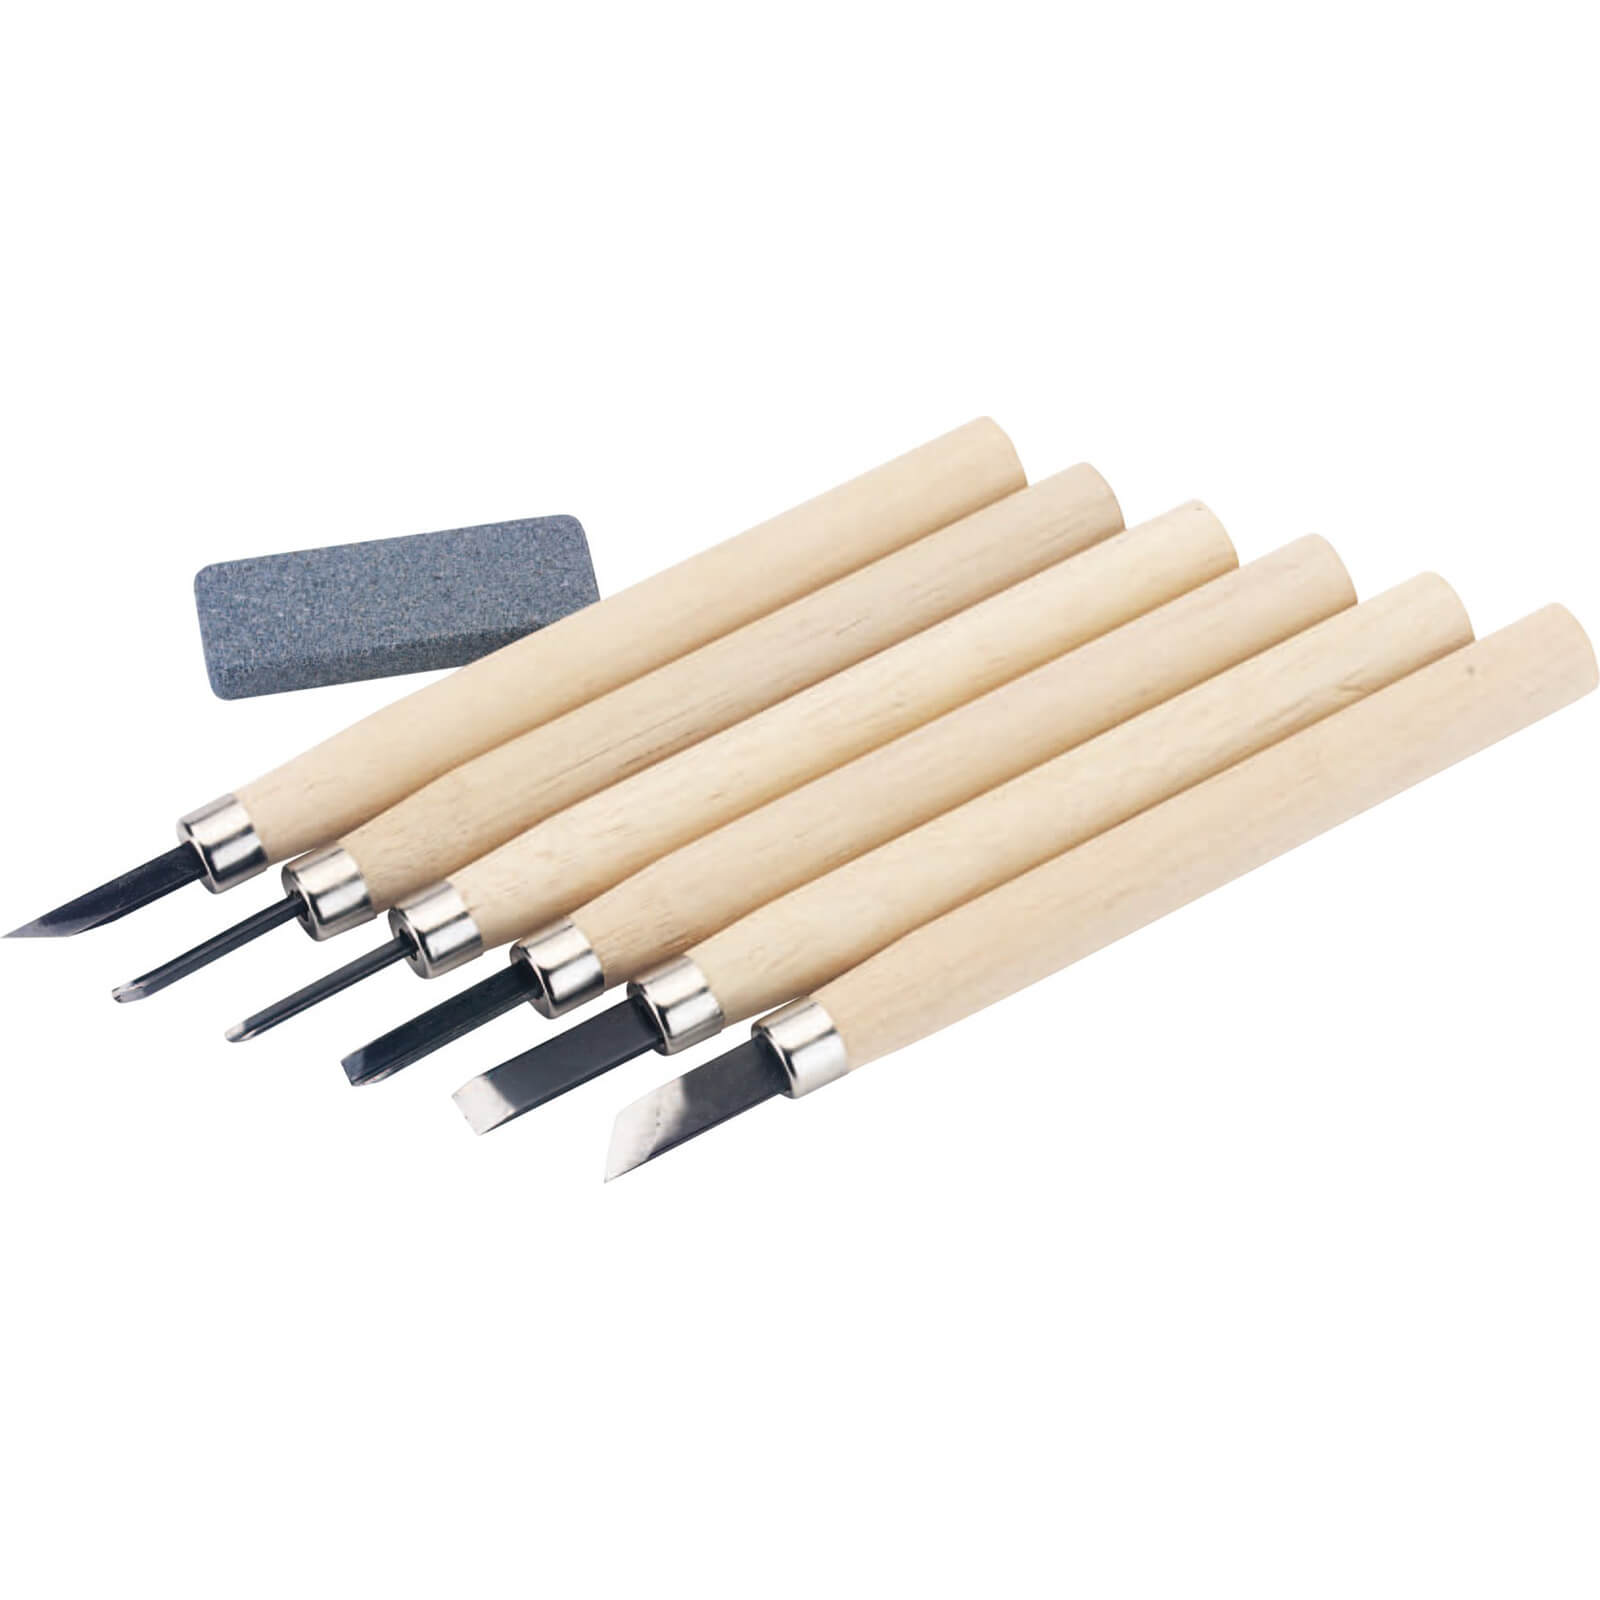 Image of Draper 7 Piece Wood Carving Gouge and Chisel Set